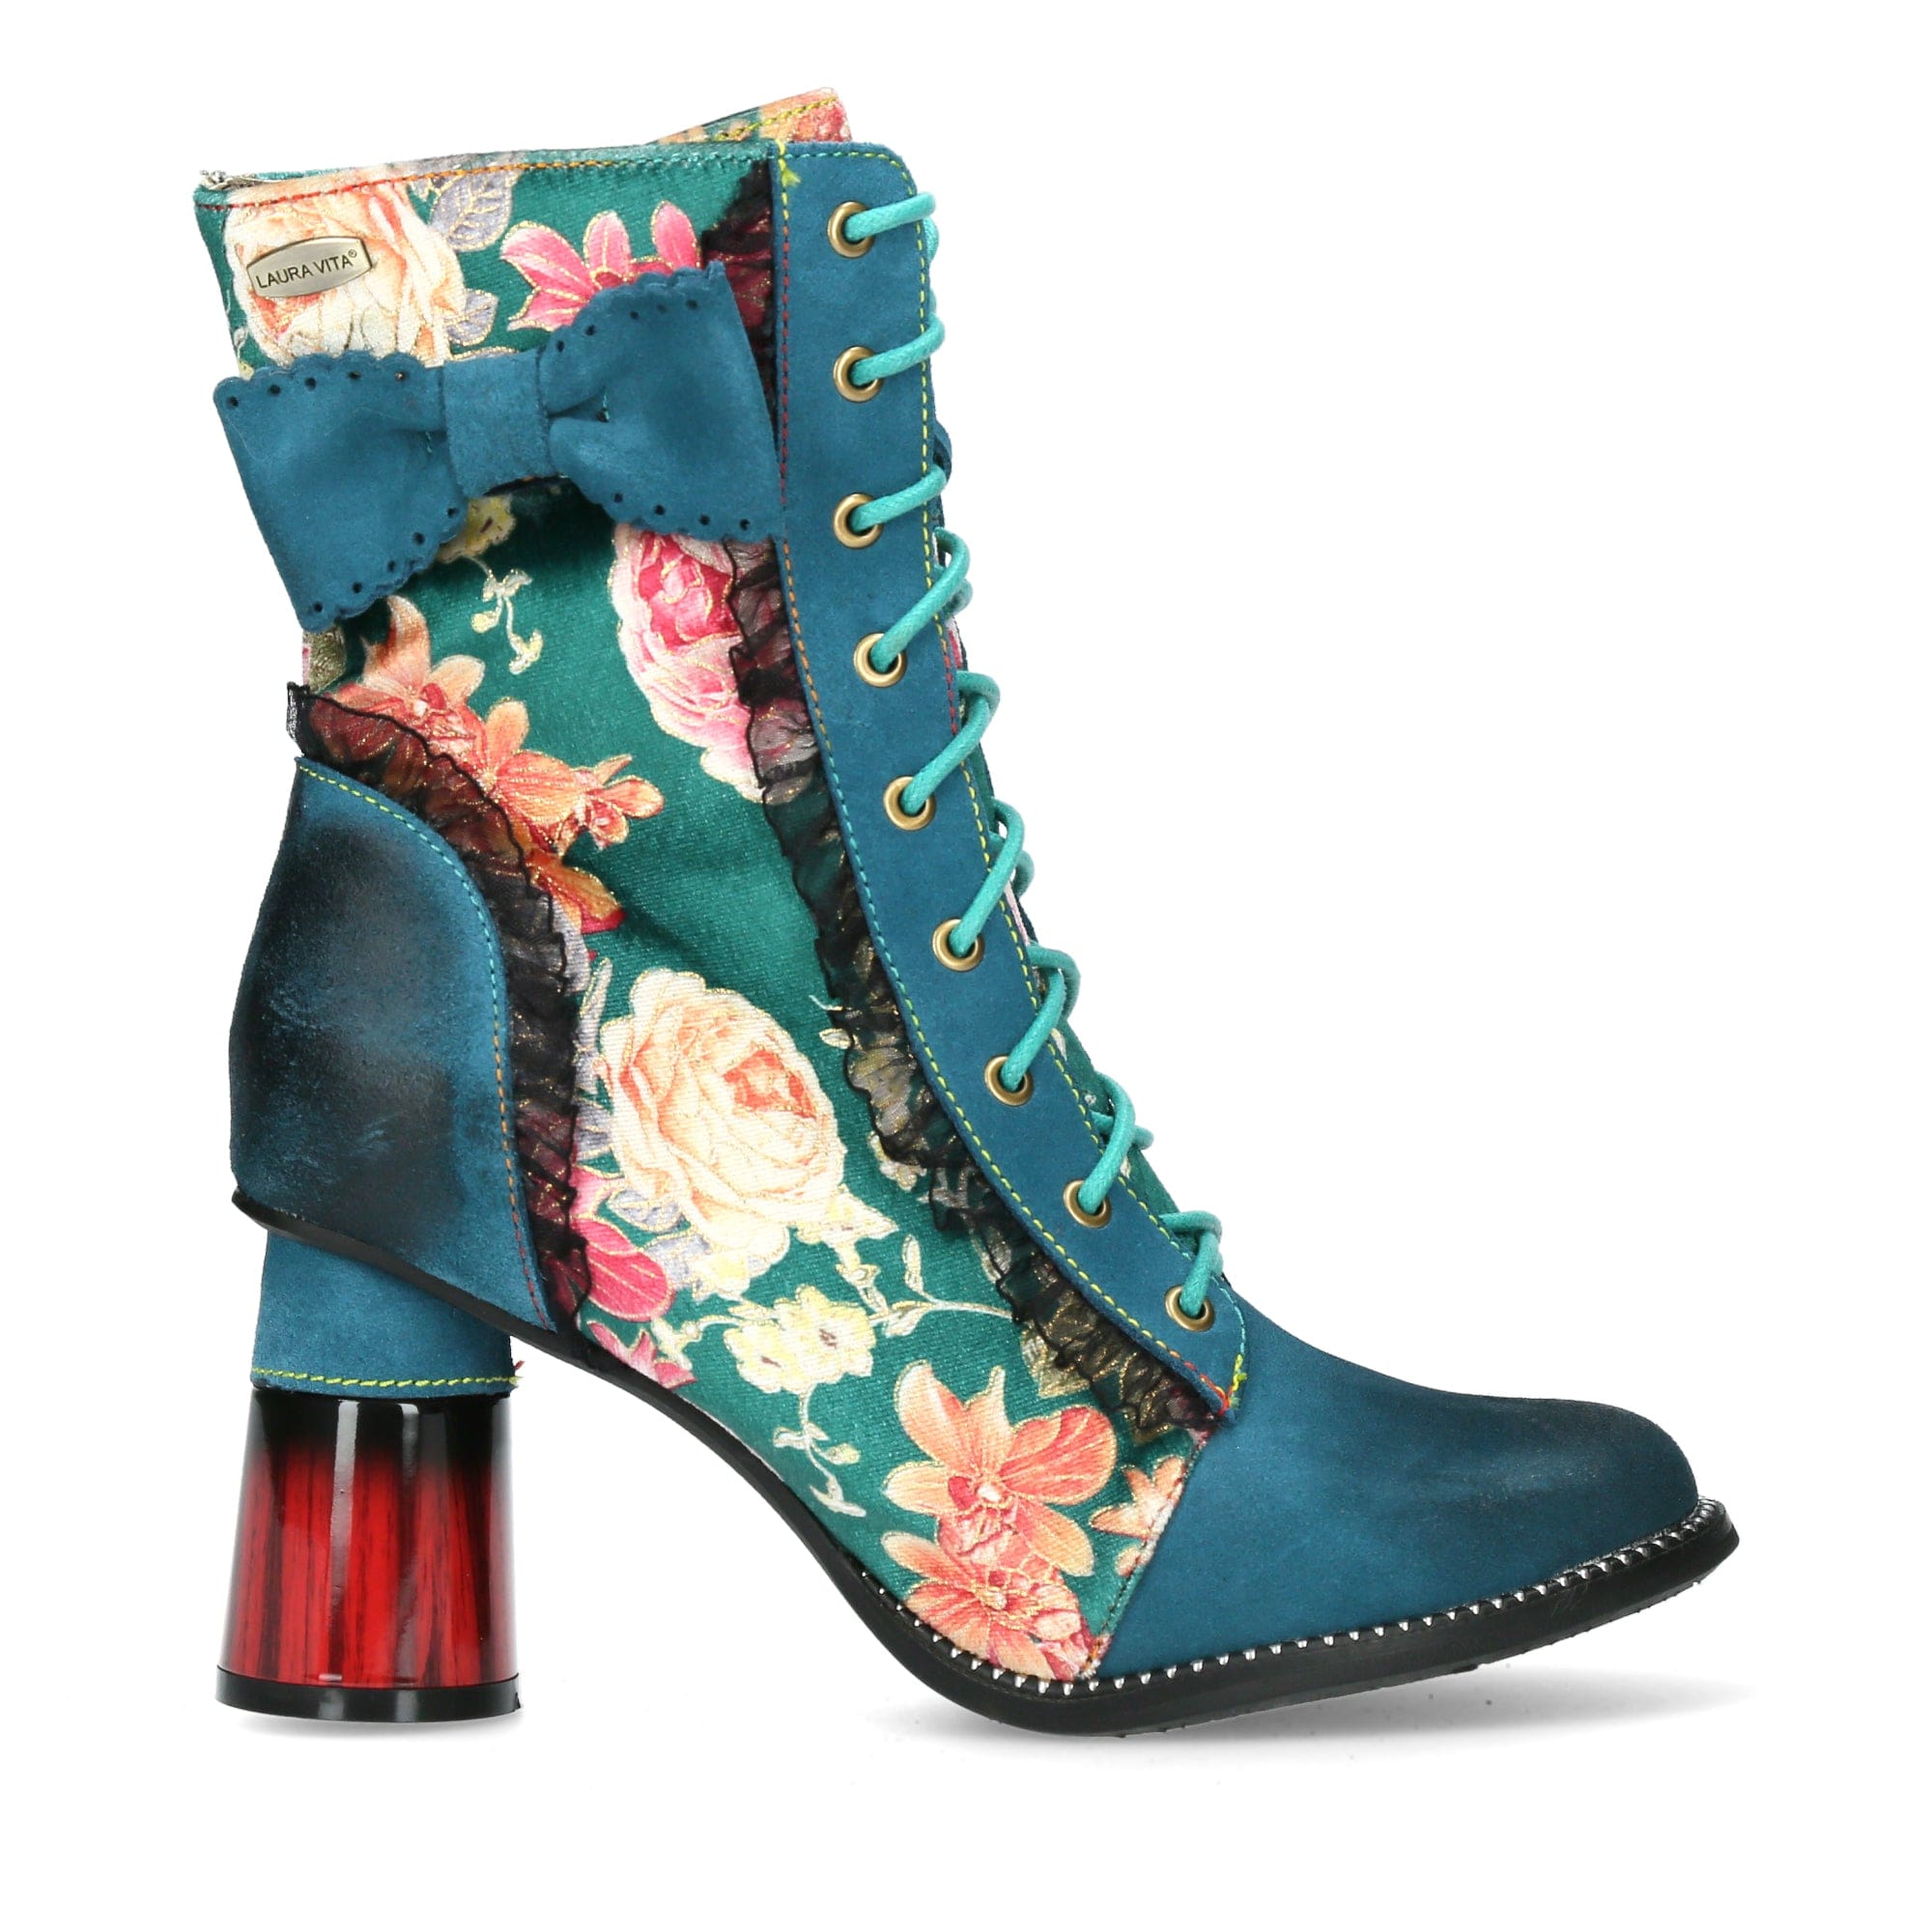 Chaussure GUCSTOO 1123 - 35 / Turquoise - Boots